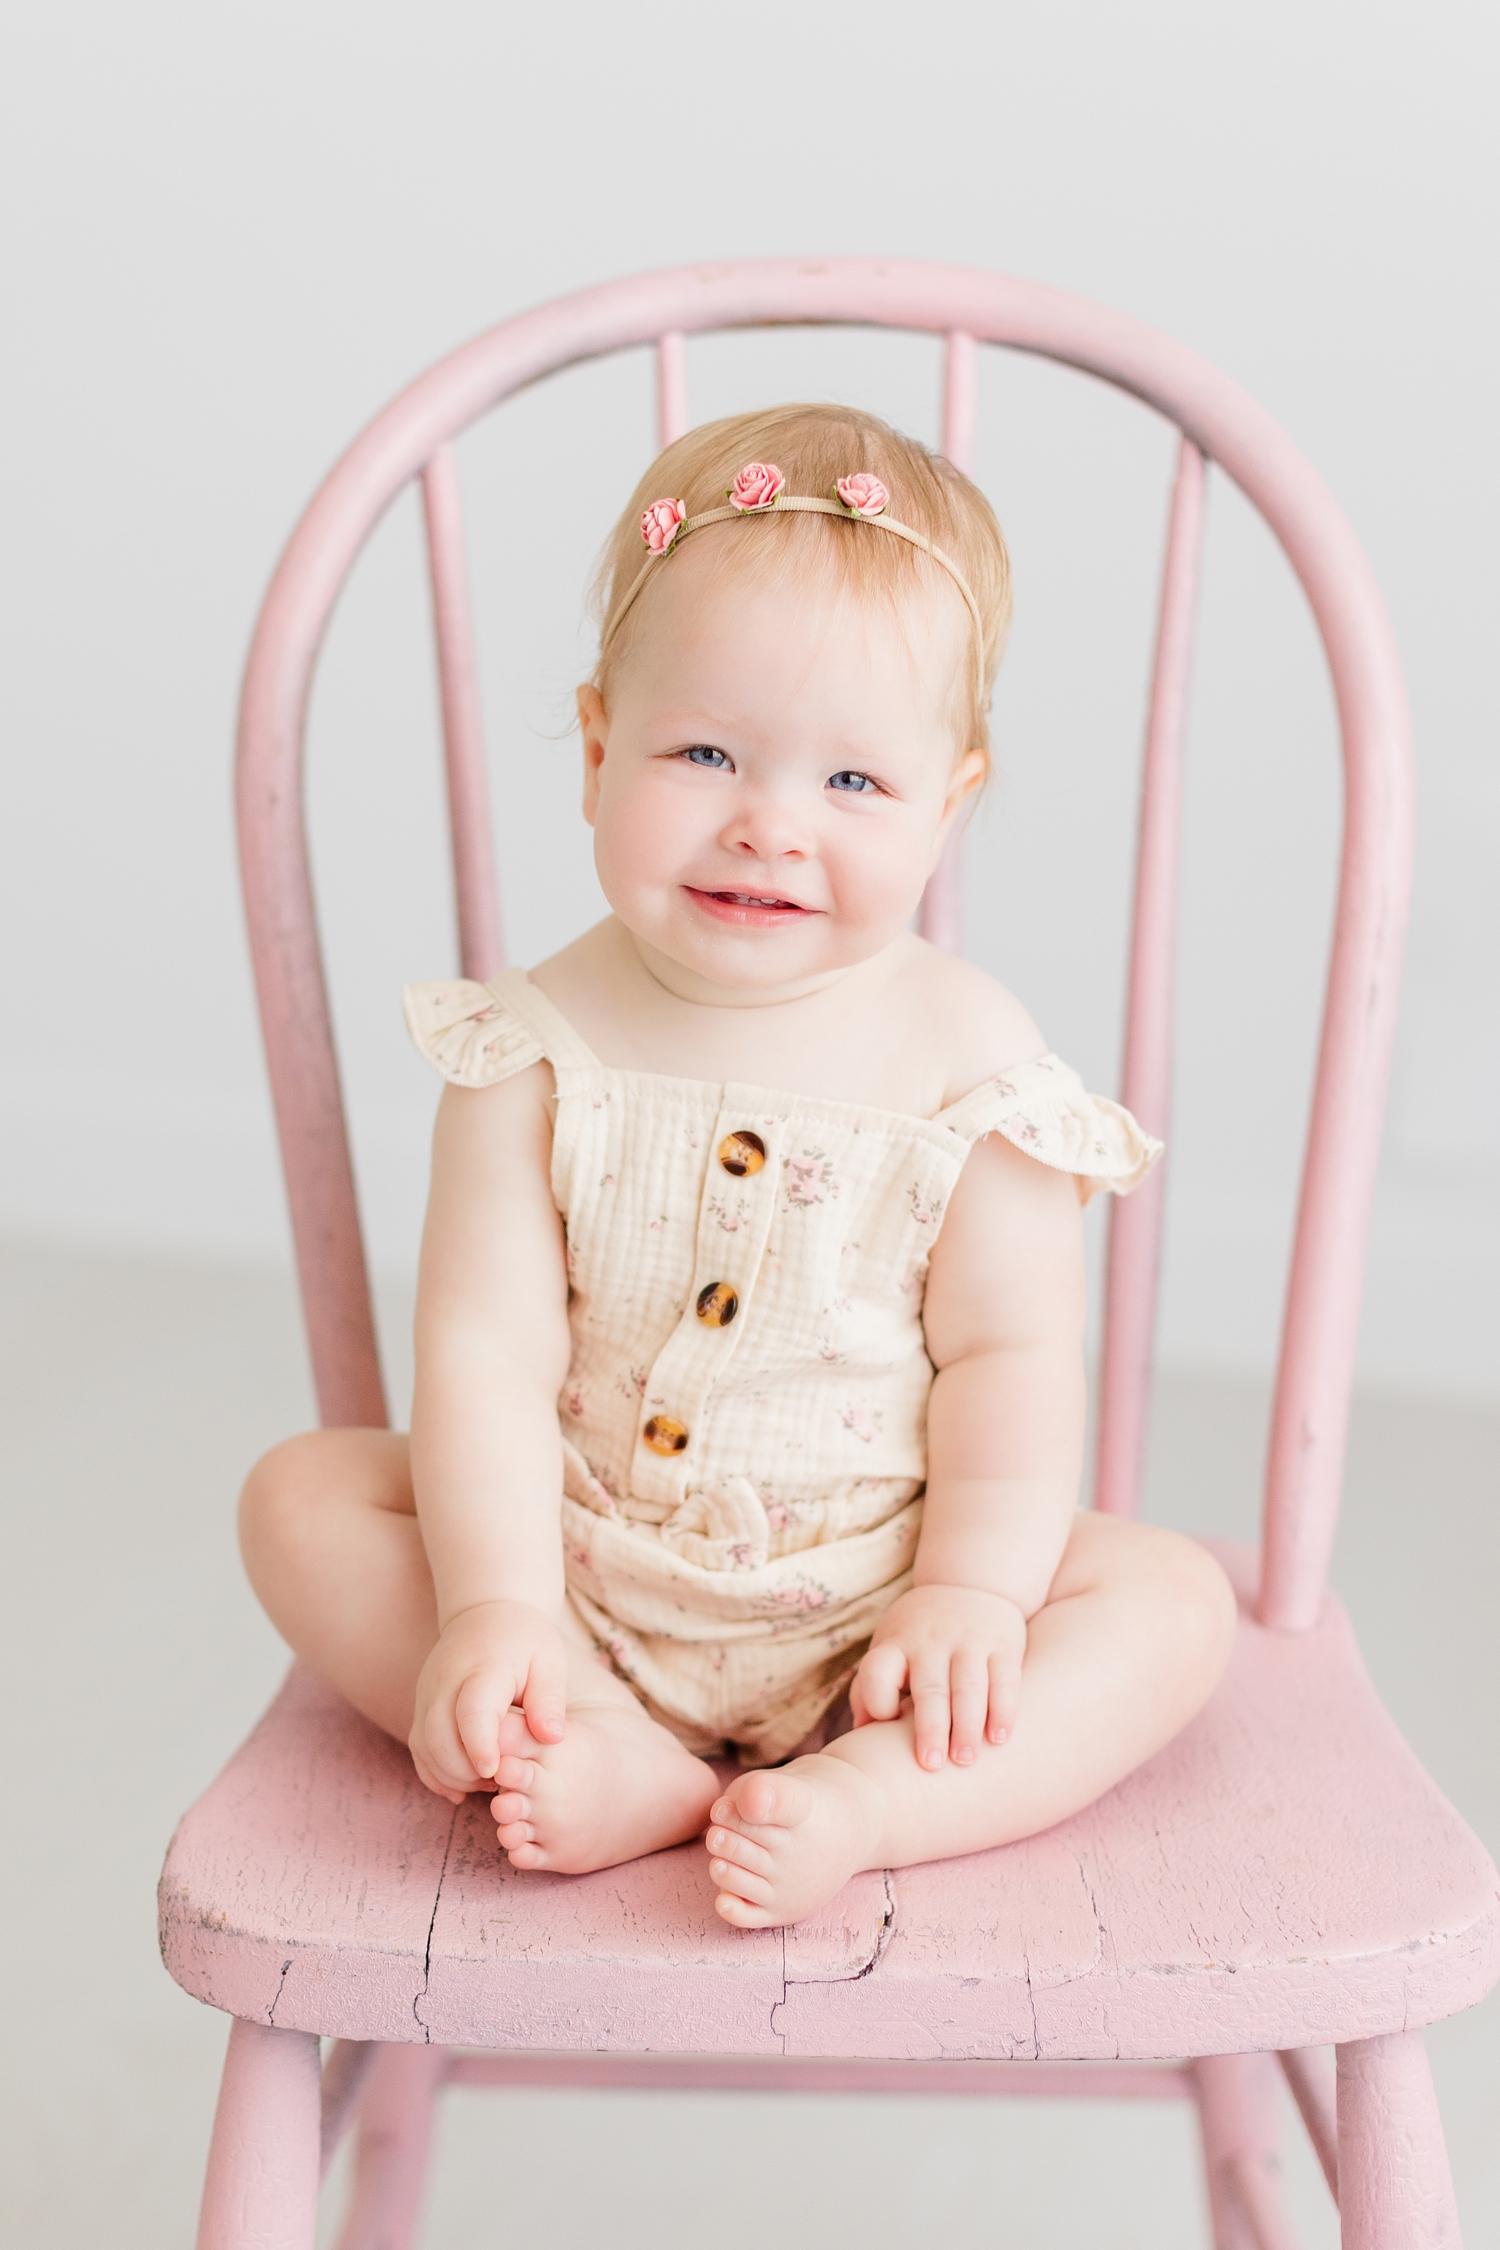 Baby Shae, wearing a cream gauze fabric romper covered in vintage roses sits in a pink wooden chair in an all white room | CB Studio